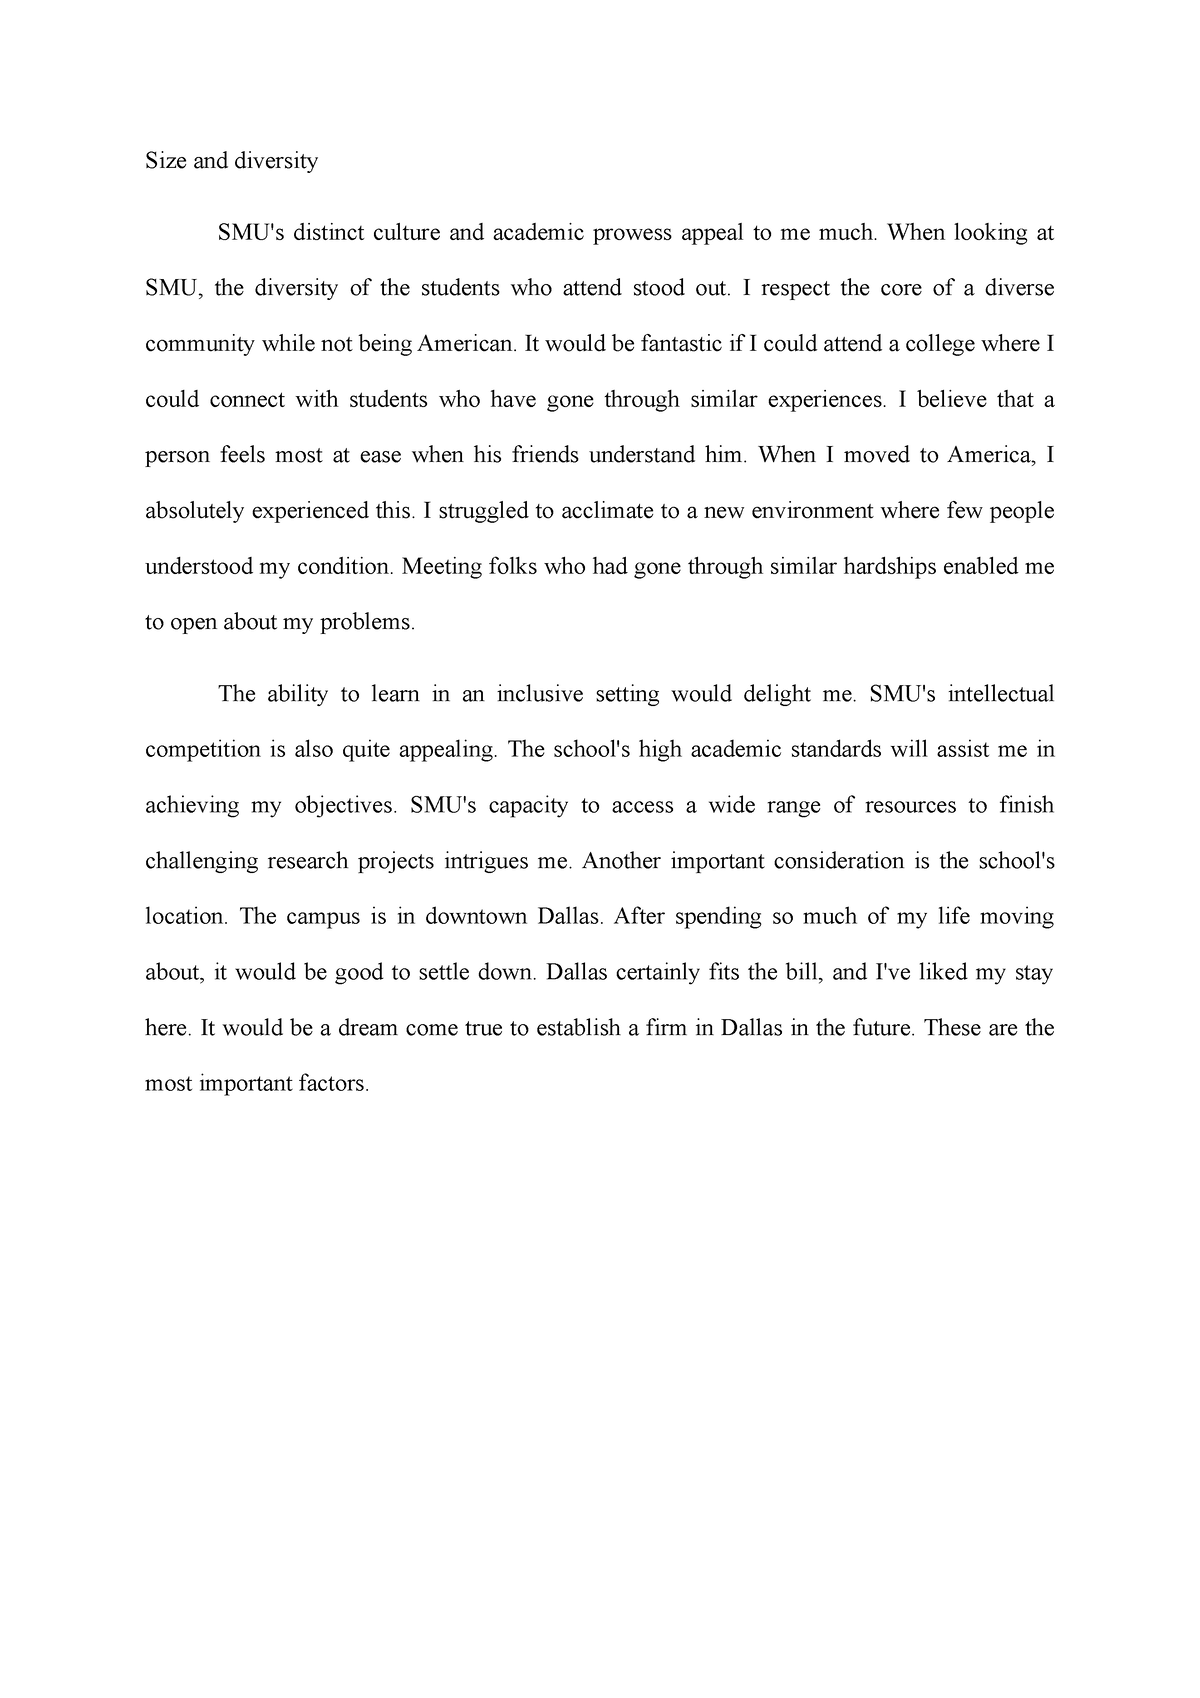 tcu honors college essay examples